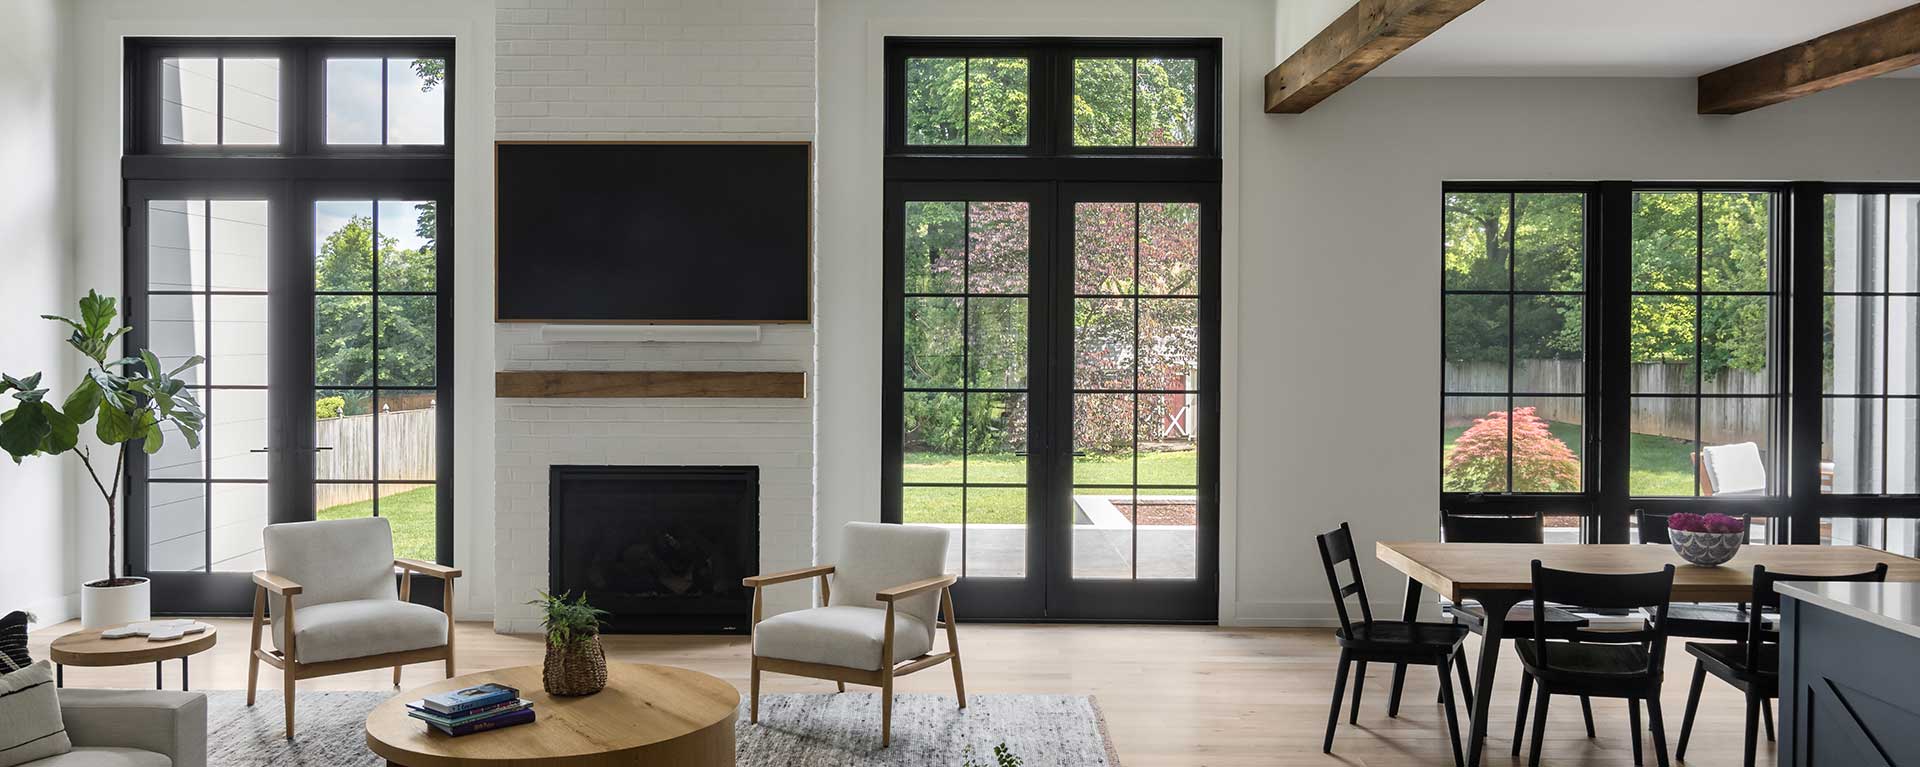 A custom modern farmhouse family room with natural exposed rough beams, two sets of doors to the patio, and kitchen island visible to the right